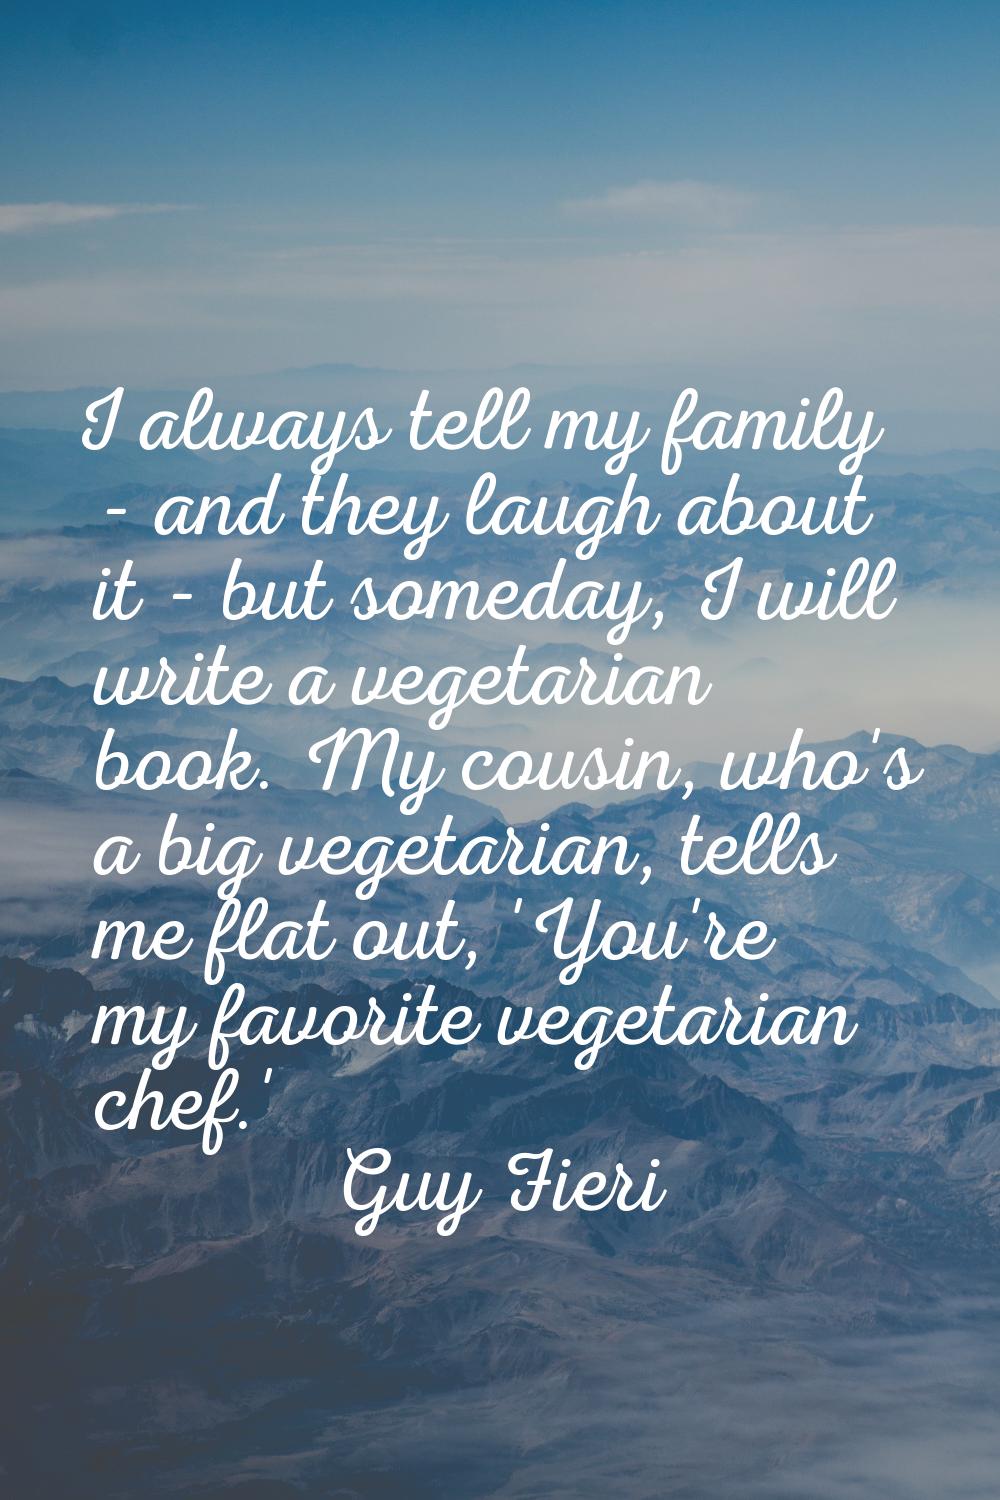 I always tell my family - and they laugh about it - but someday, I will write a vegetarian book. My